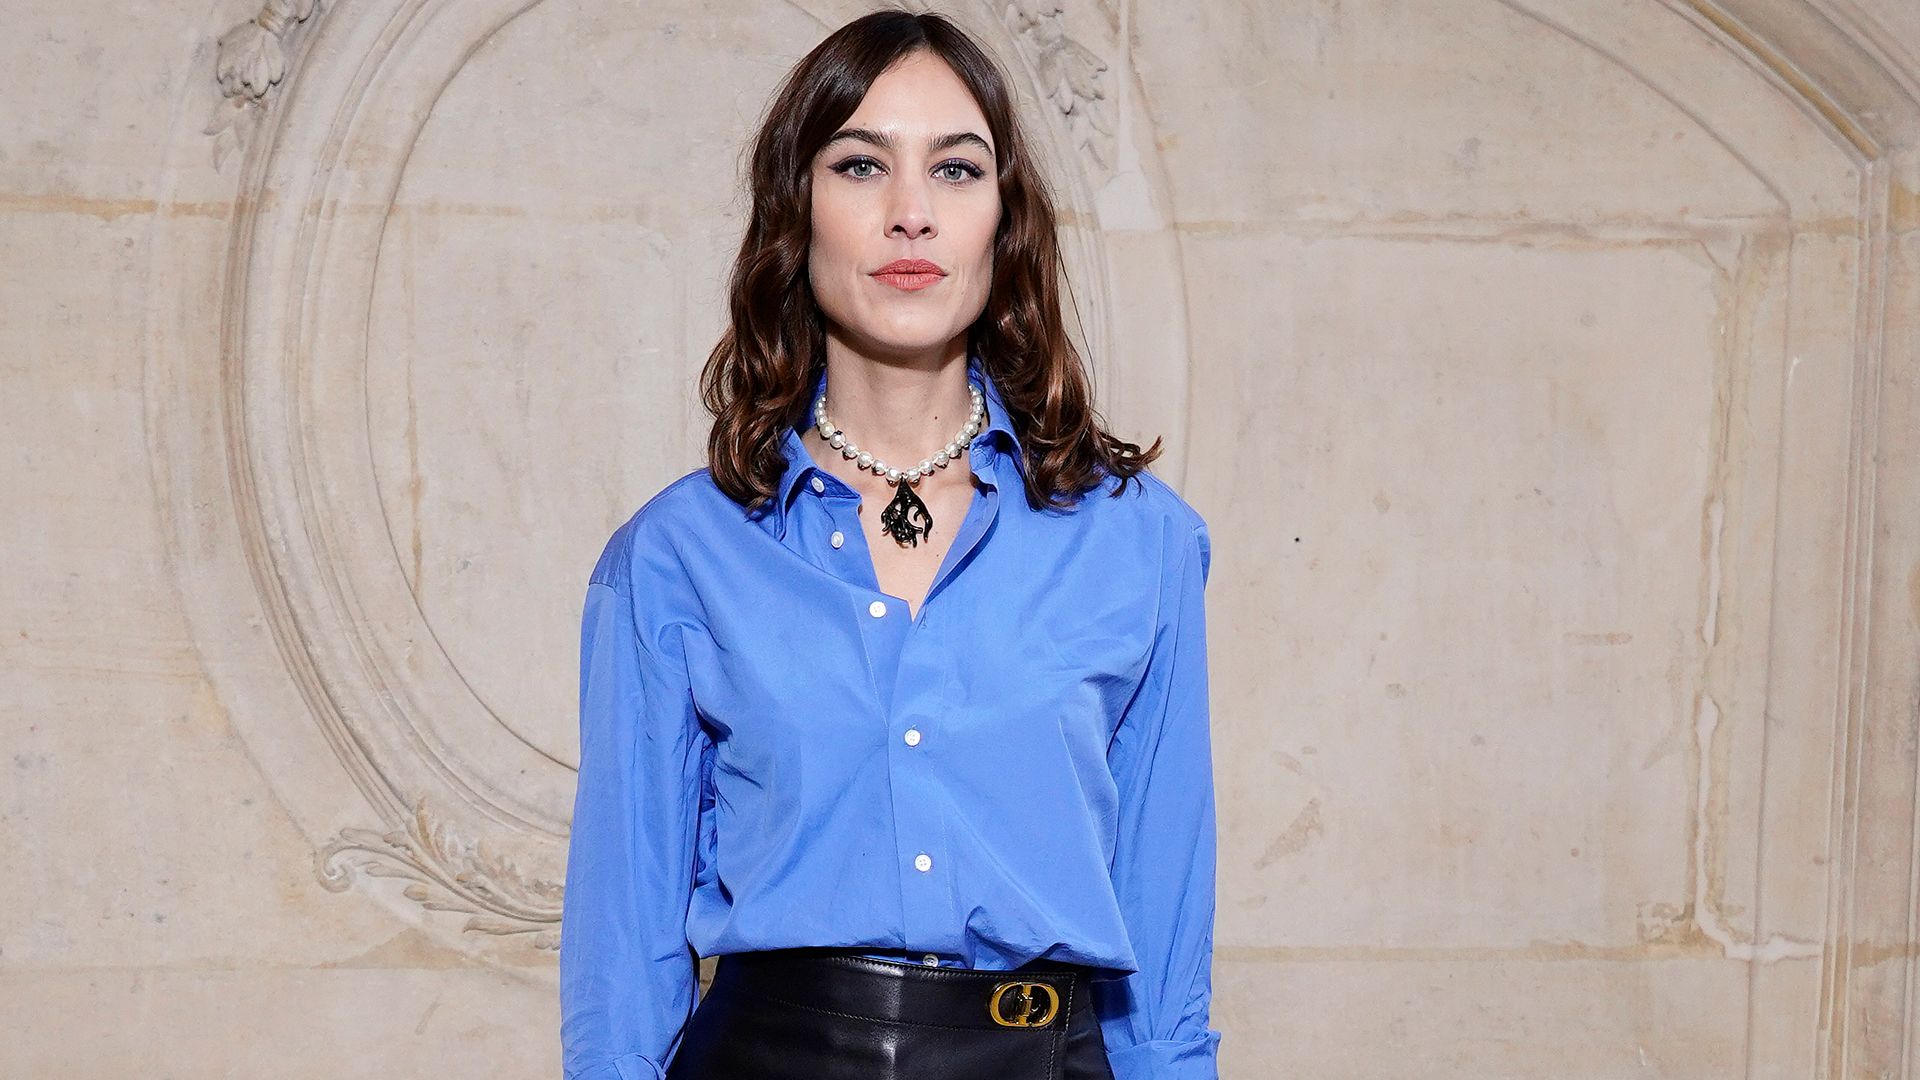 PARIS, FRANCE - JANUARY 20: Alexa Chung attends the Dior Haute Couture Spring/Summer 2020 show as part of Paris Fashion Week on January 20, 2020 in Paris, France. (Photo by Francois Durand/Getty Images for Dior)